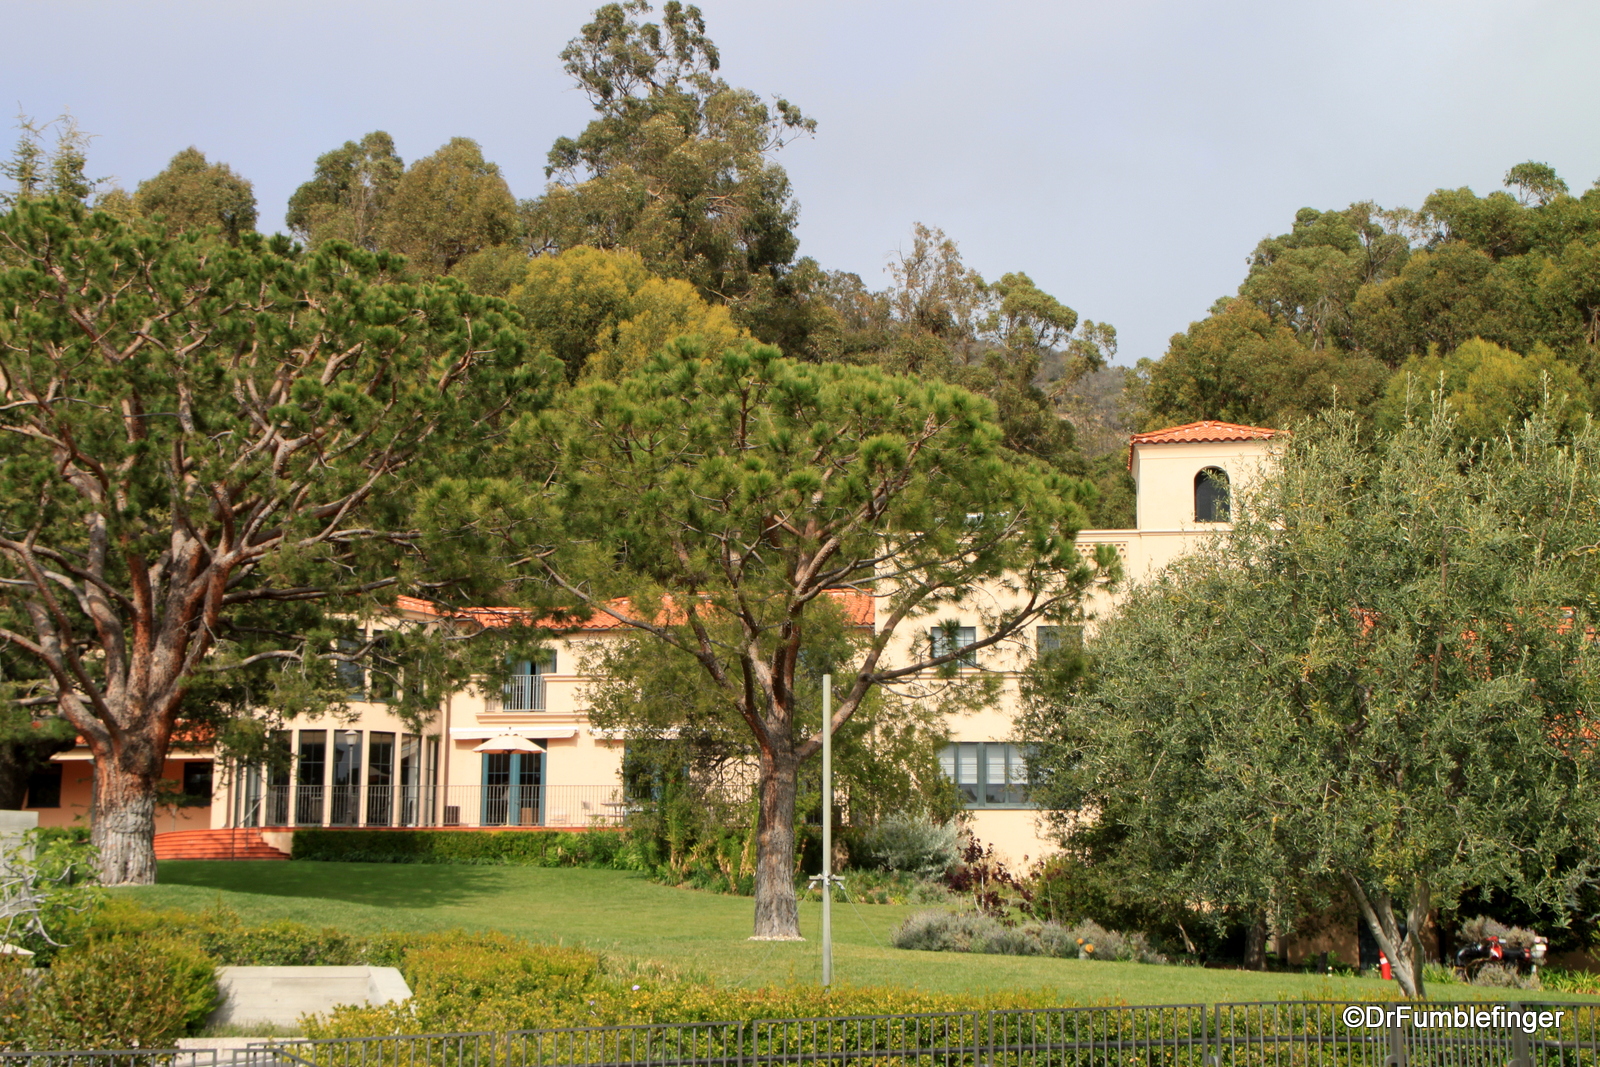 JP Getty's home on the rear of the Getty Villa's grounds.